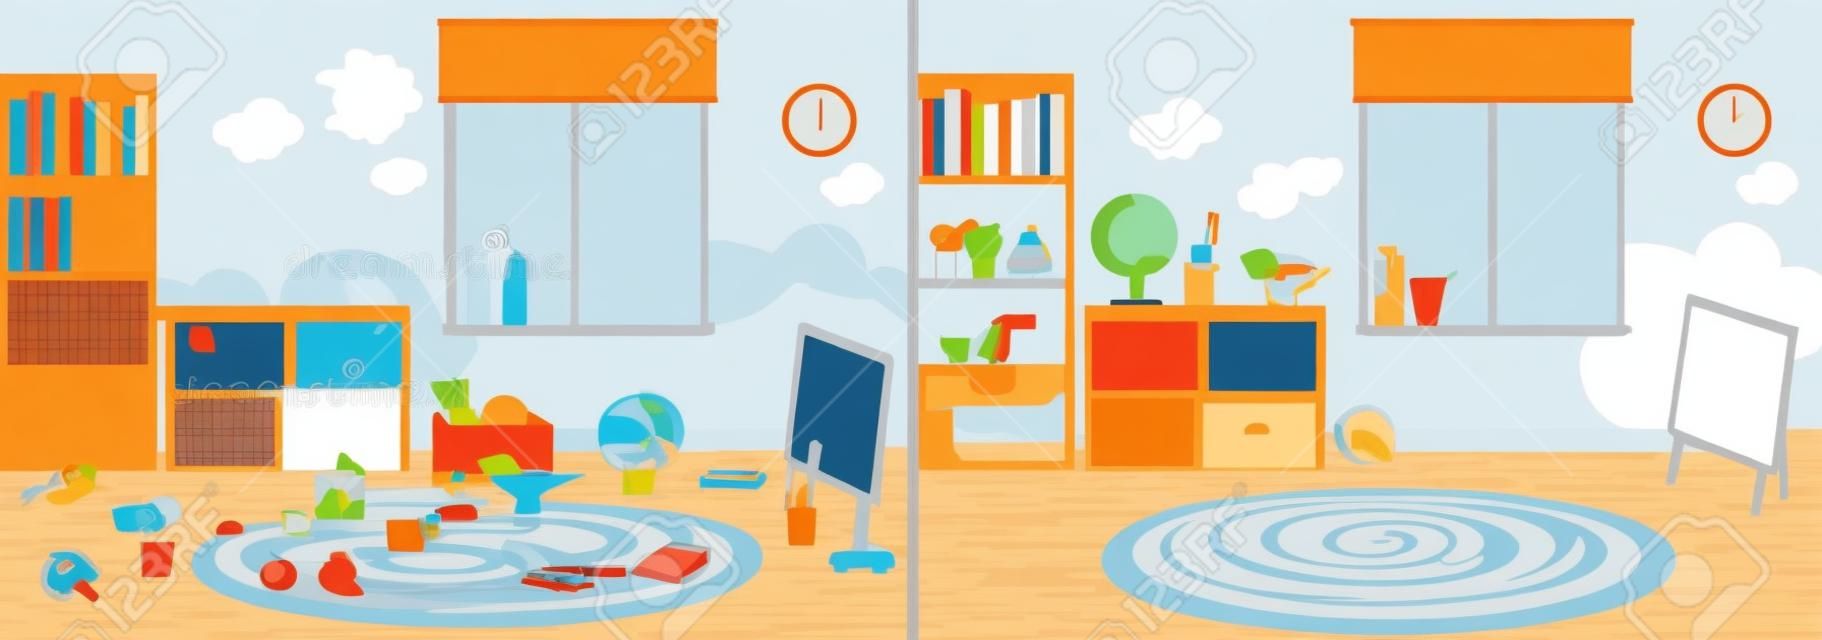 room clean and dirty vector illustration